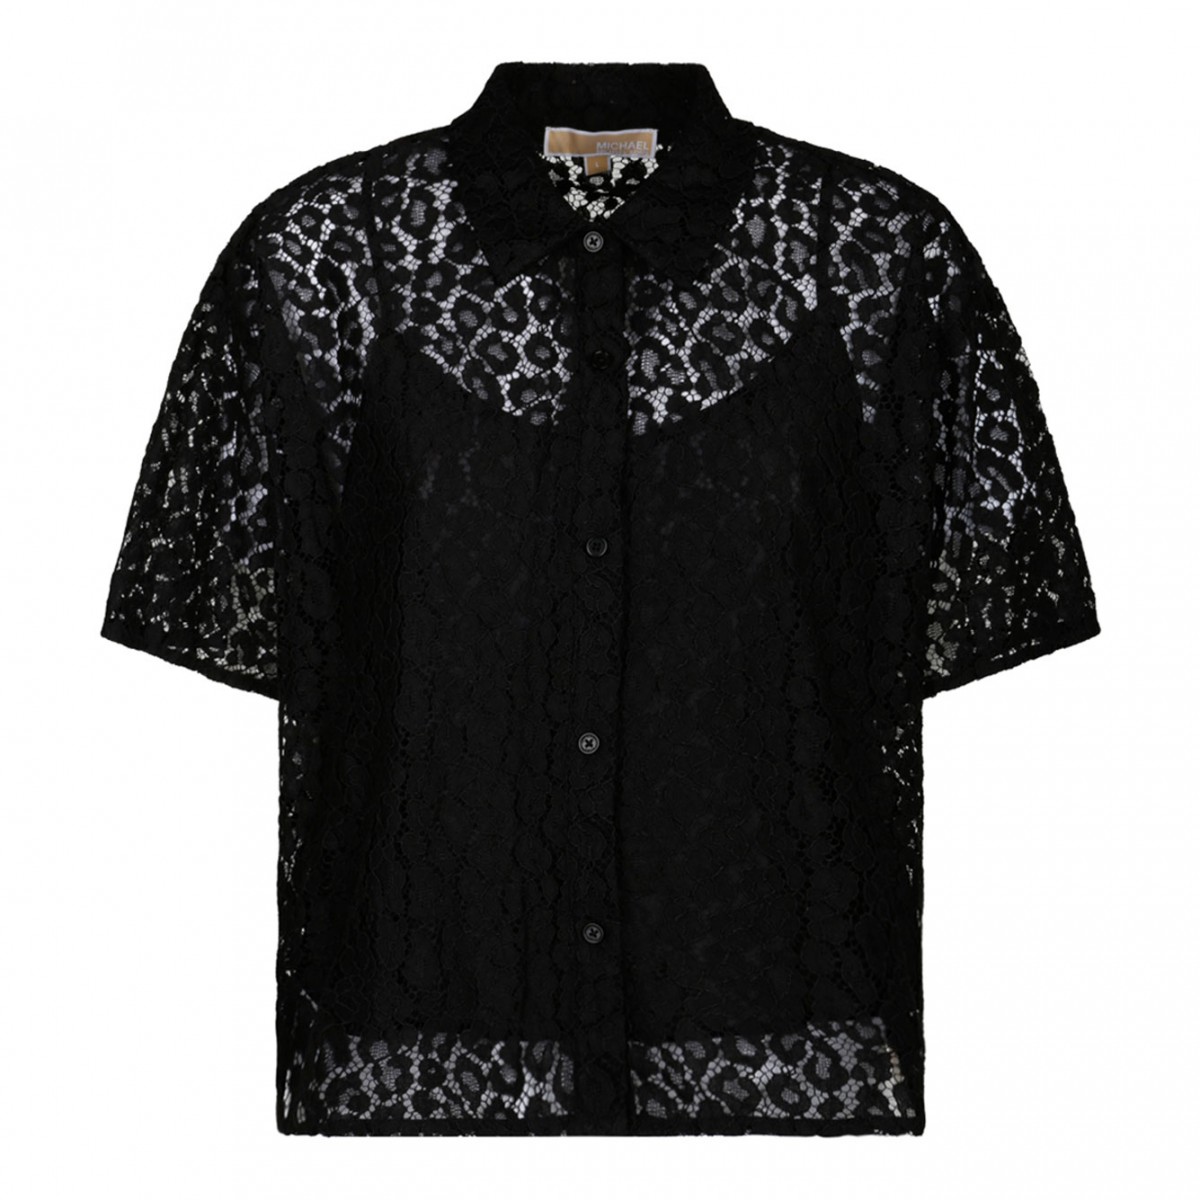 Black Corded Lace Shirt